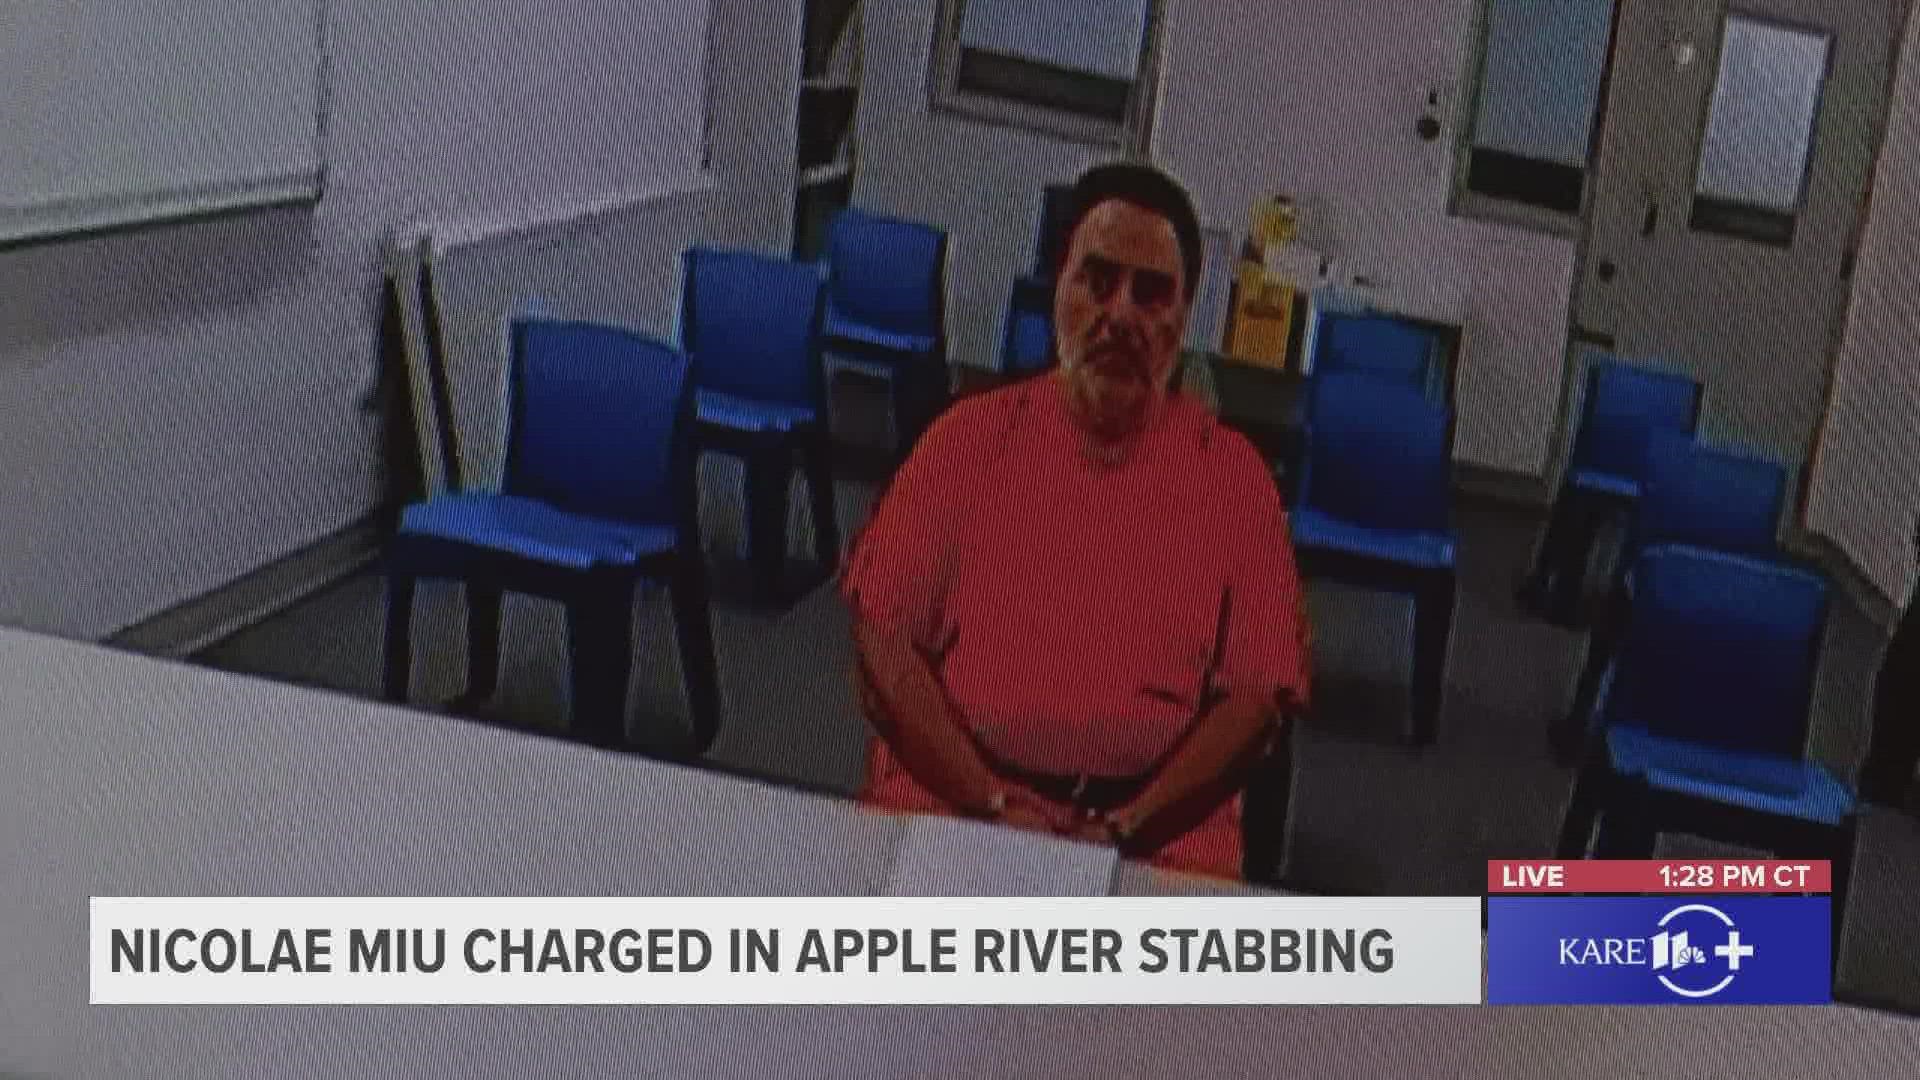 Nicolae Miu, charged with 1st-degree intentional homicide and four other counts in connection to a stabbing along the Apple River, appeared in court on Aug. 1, 2022.